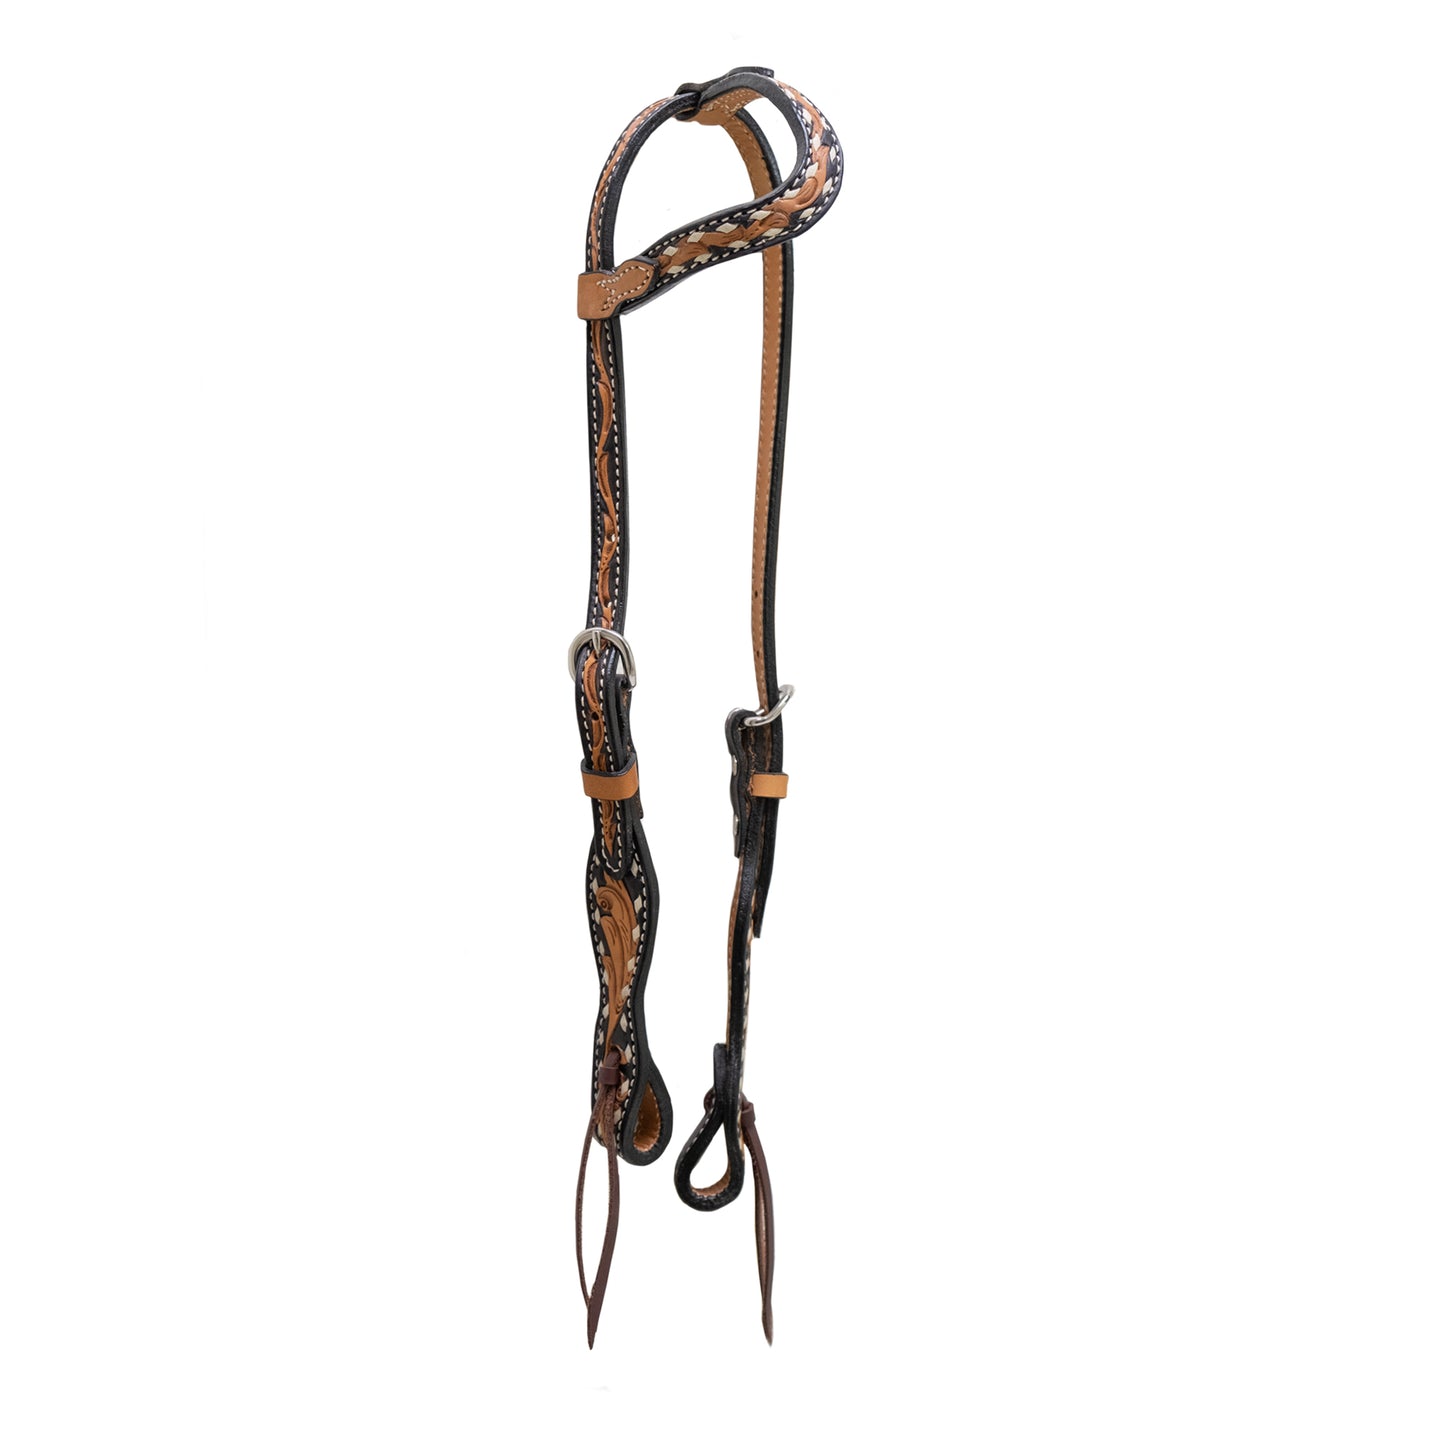 5/8" wave one ear headstall golden leather sunrise tooling black paint to the edge with rawhide buckstitch. 